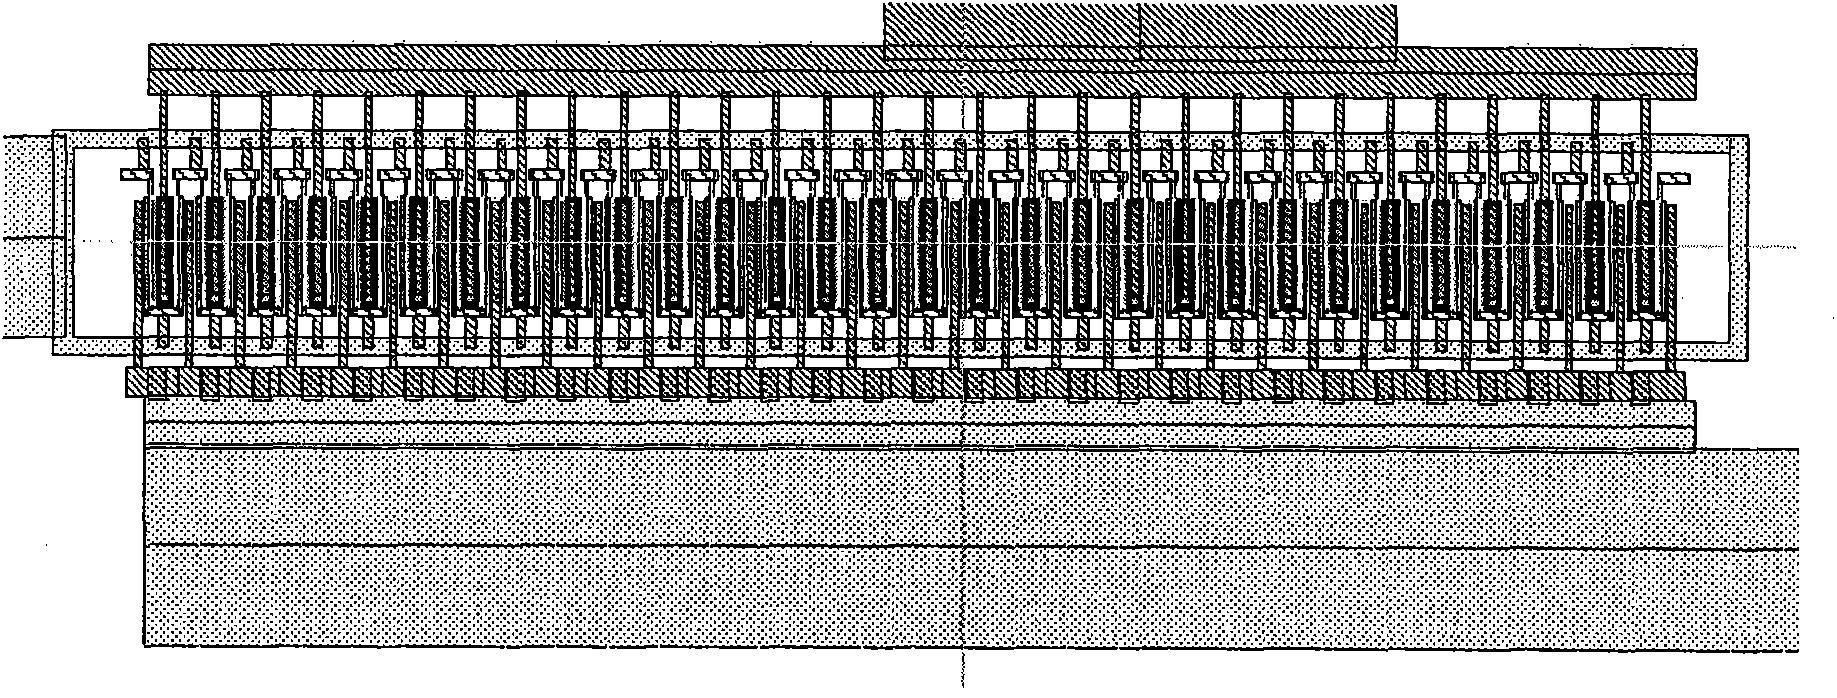 Radio frequency laterally diffused metal oxide semiconductor (LDMOS) device based on silicon on insulator (SOI) and method for injecting device